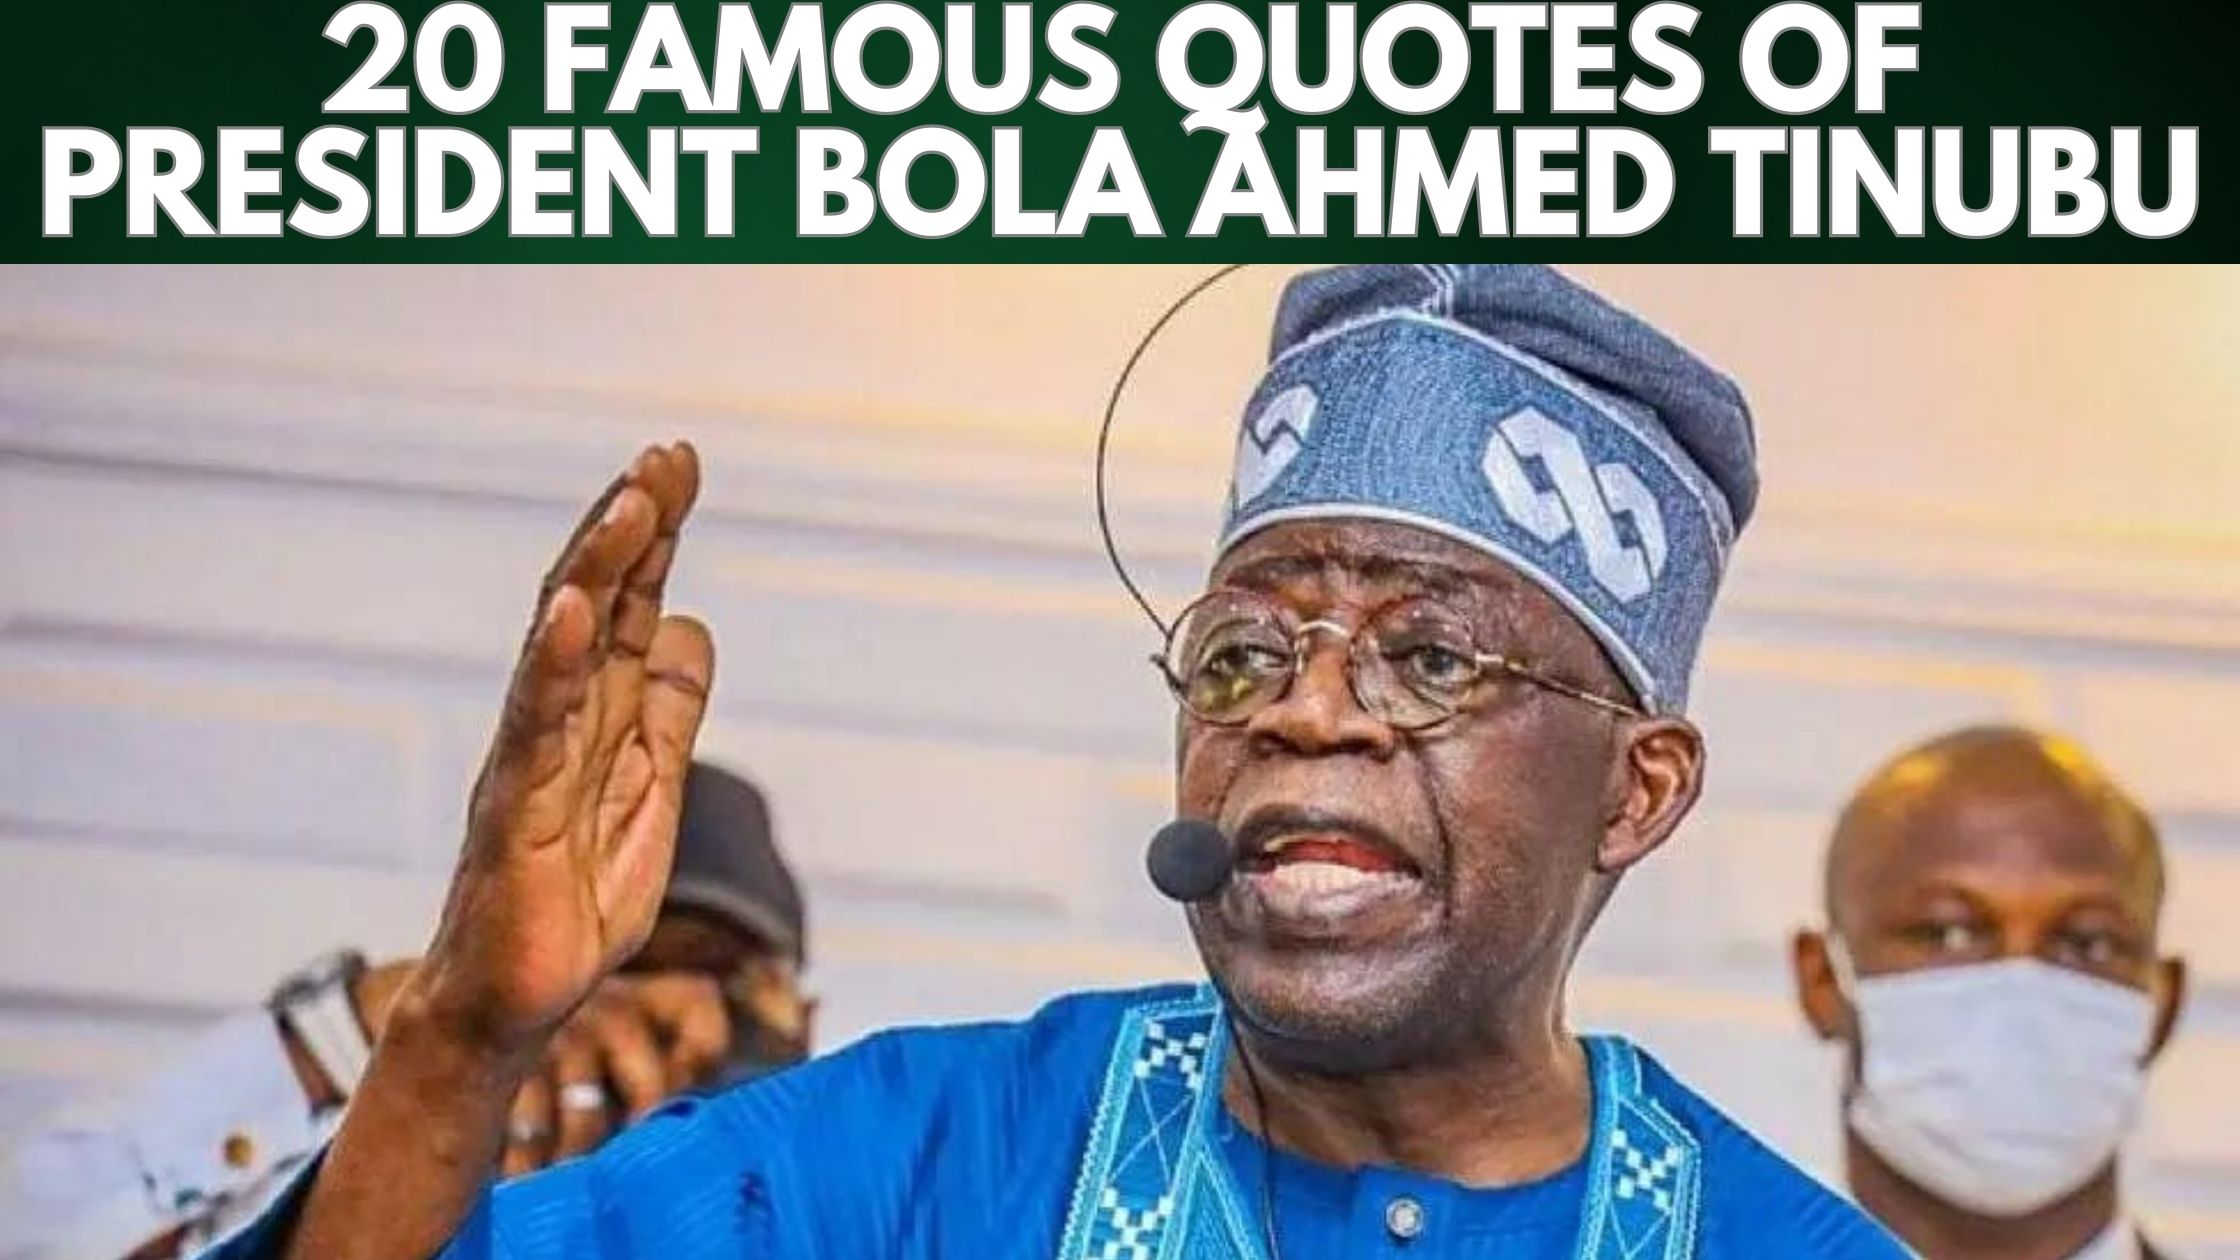 20 Famous Quotes Of President Bola Ahmed Tinubu